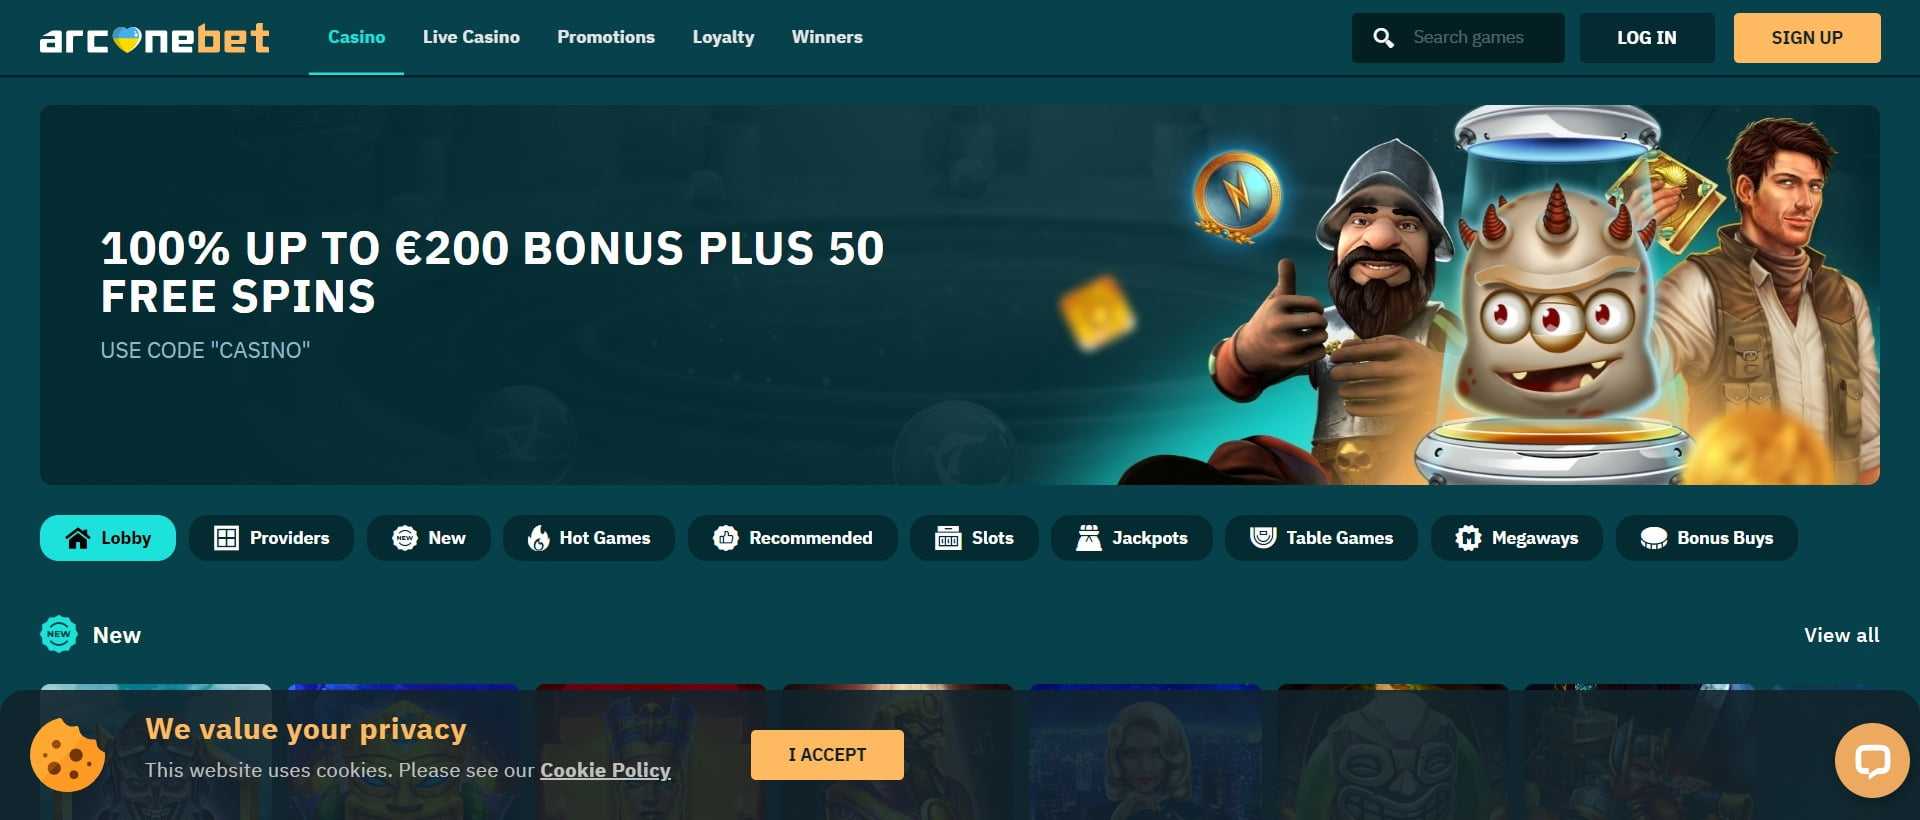 Arcanebet Affiliates Program Review: 45% For the 1st 2 Months